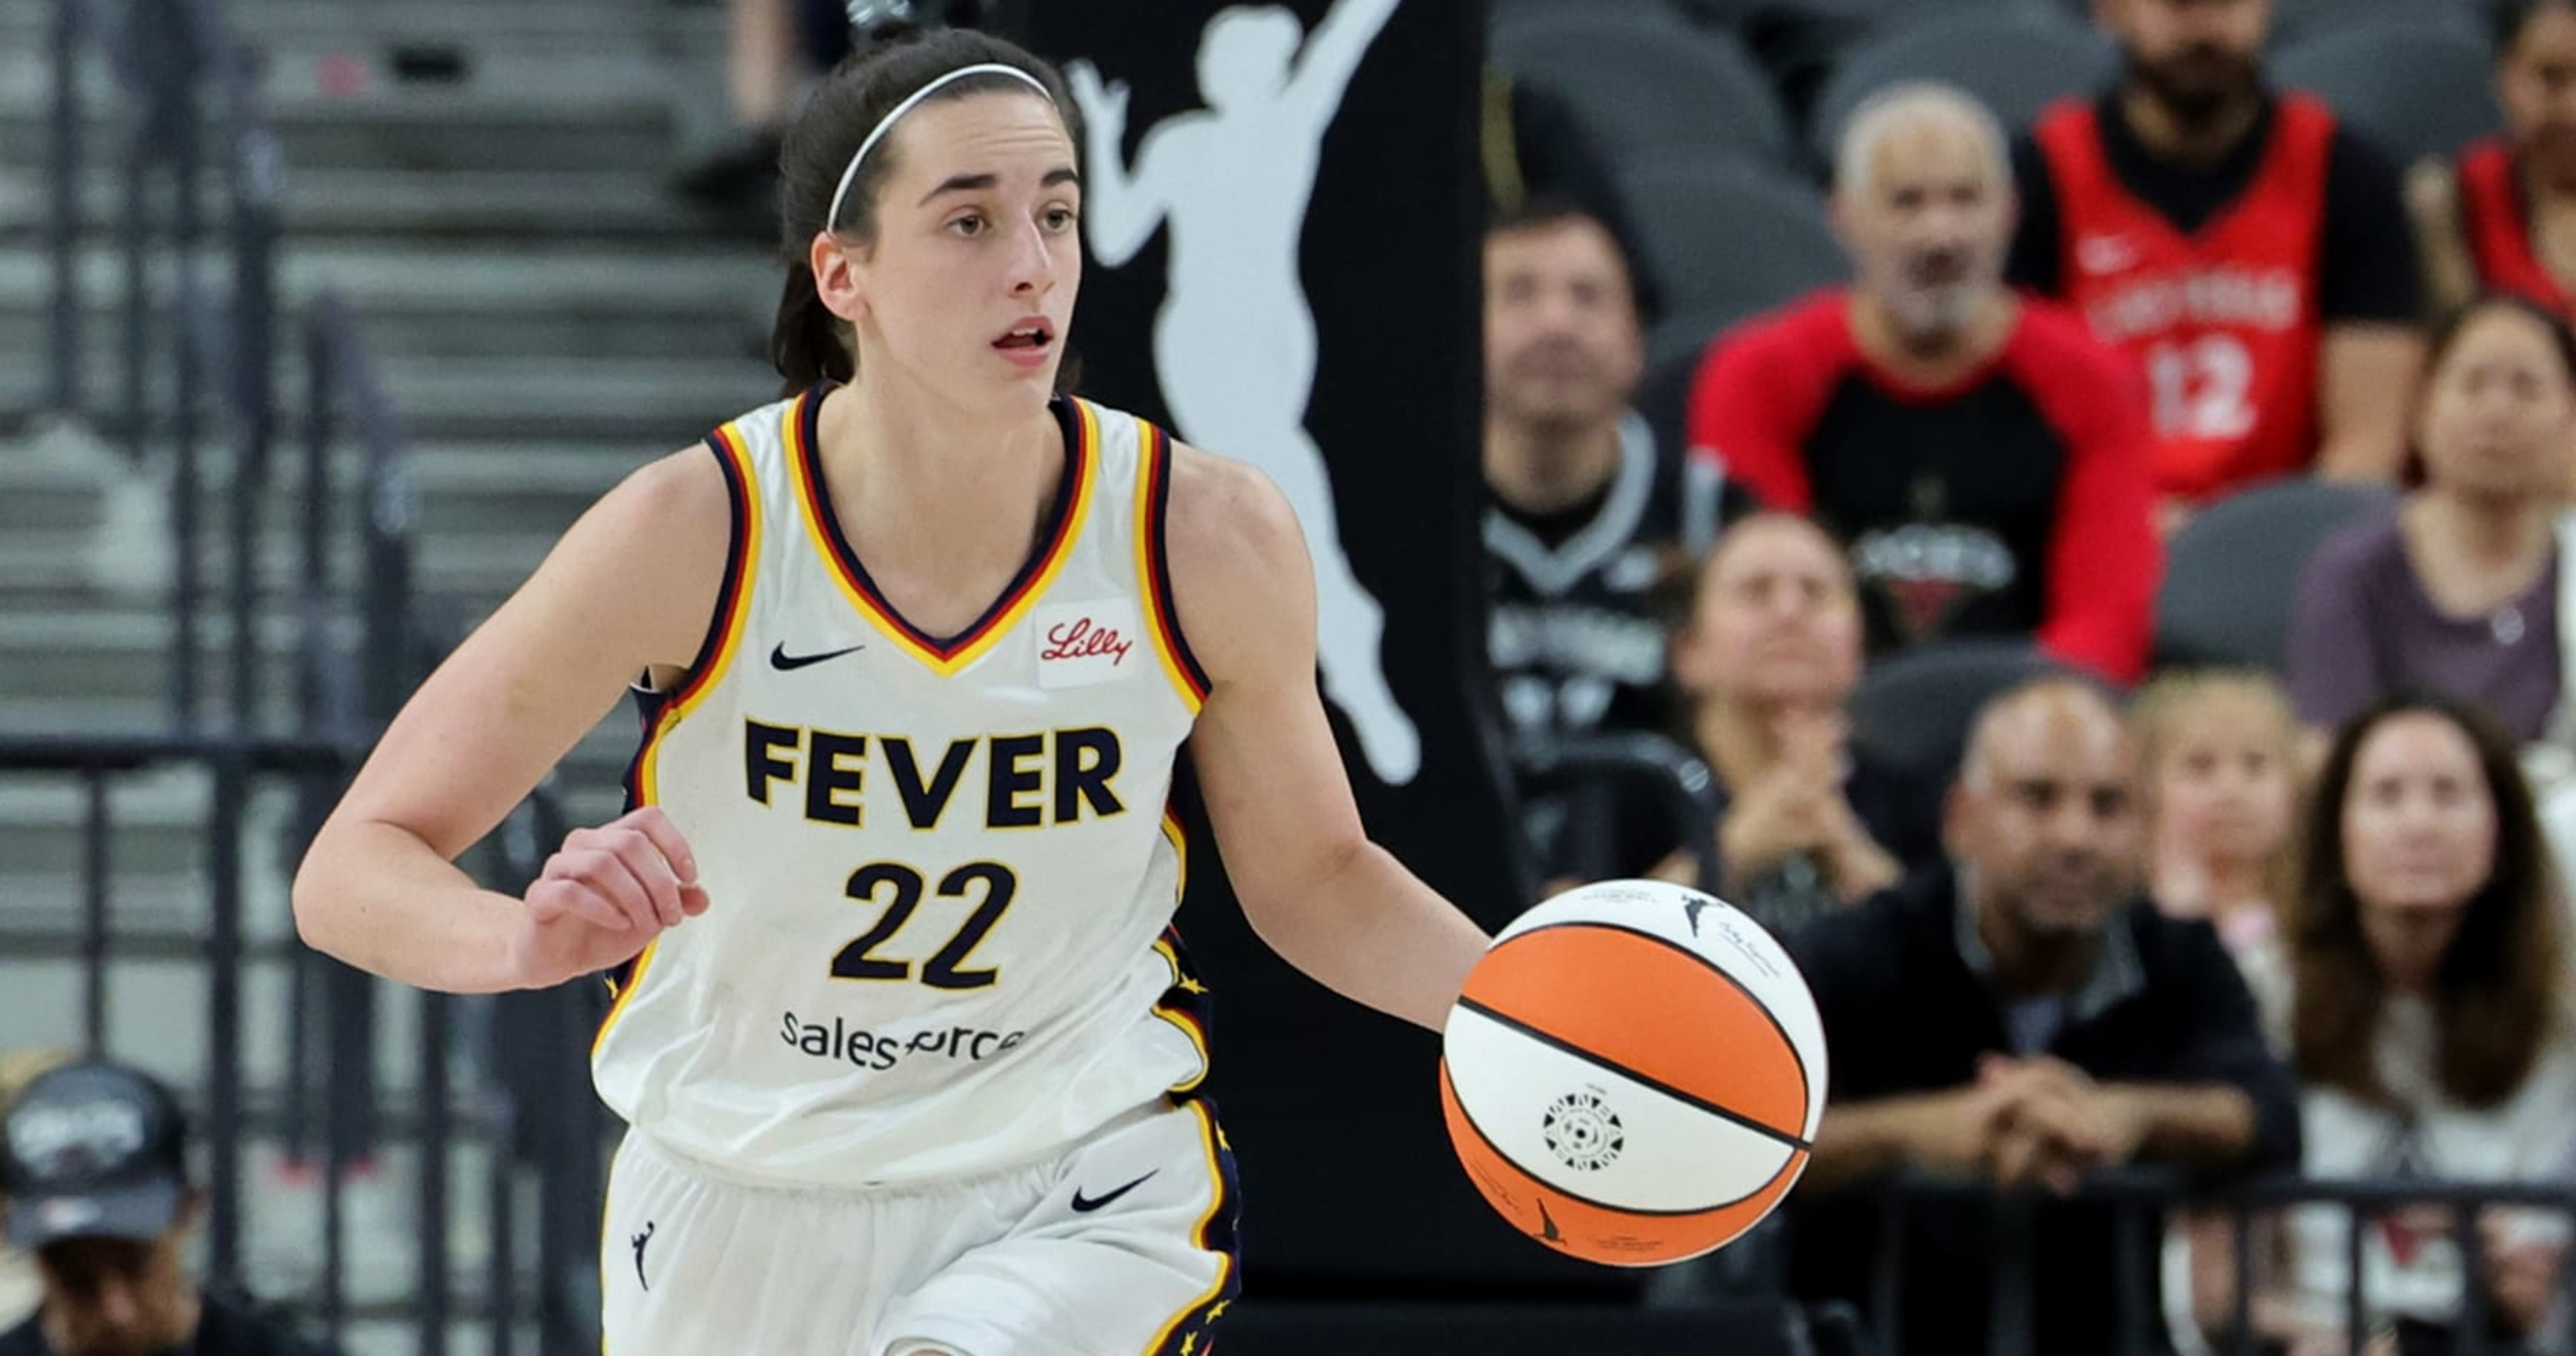 Caitlin Clark's Historic Triple-Double: Indiana Fever Star Leads Comeback Victory over New York Liberty